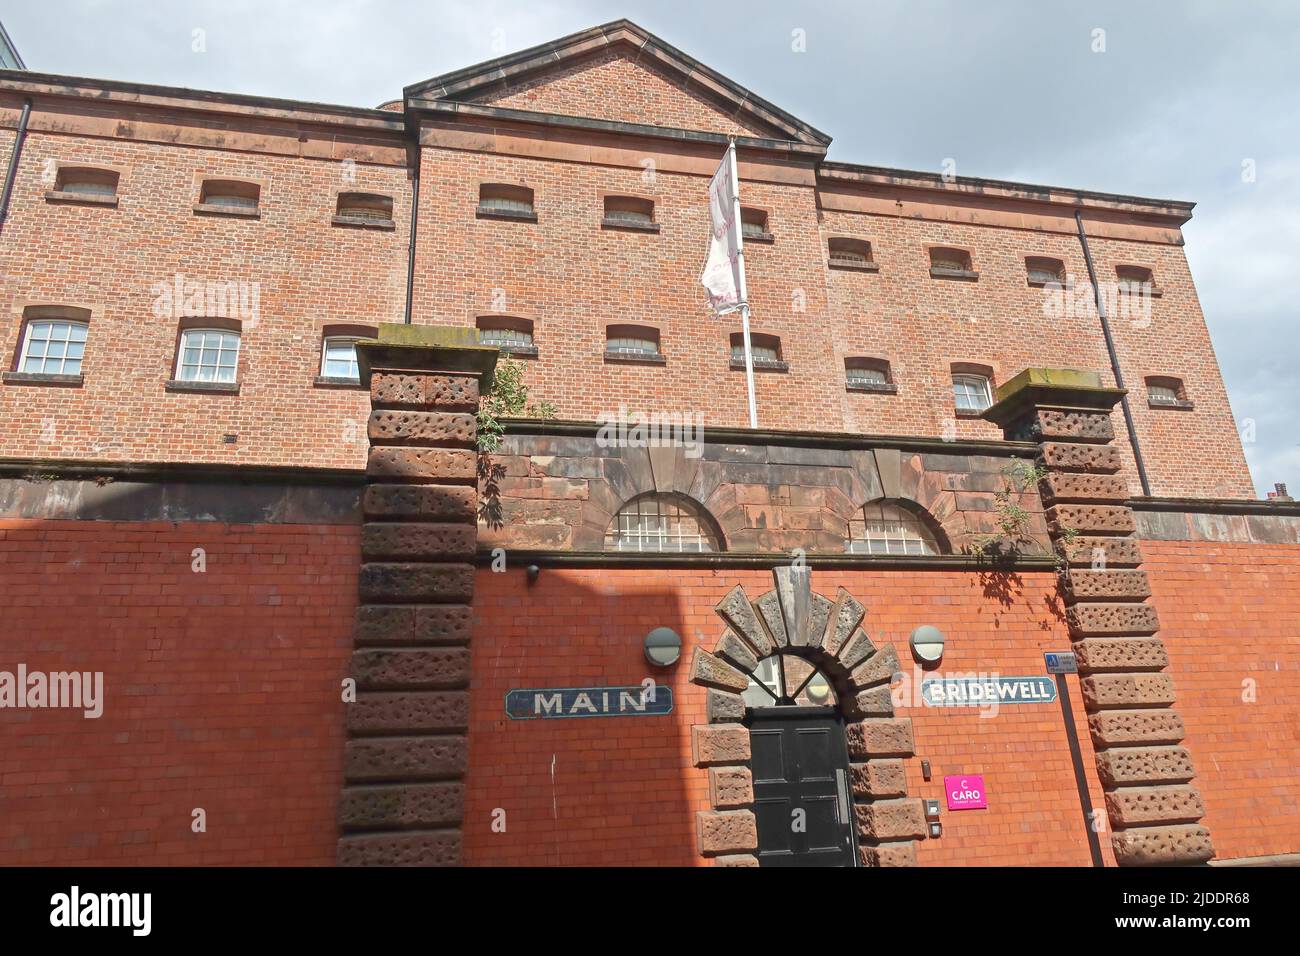 Liverpools Old Main entrance of Bridewell Prison, 1859, closed 1999, now student flats, Cheapside, Liverpool , Merseyside, England, UK, L2 2DH Stock Photo